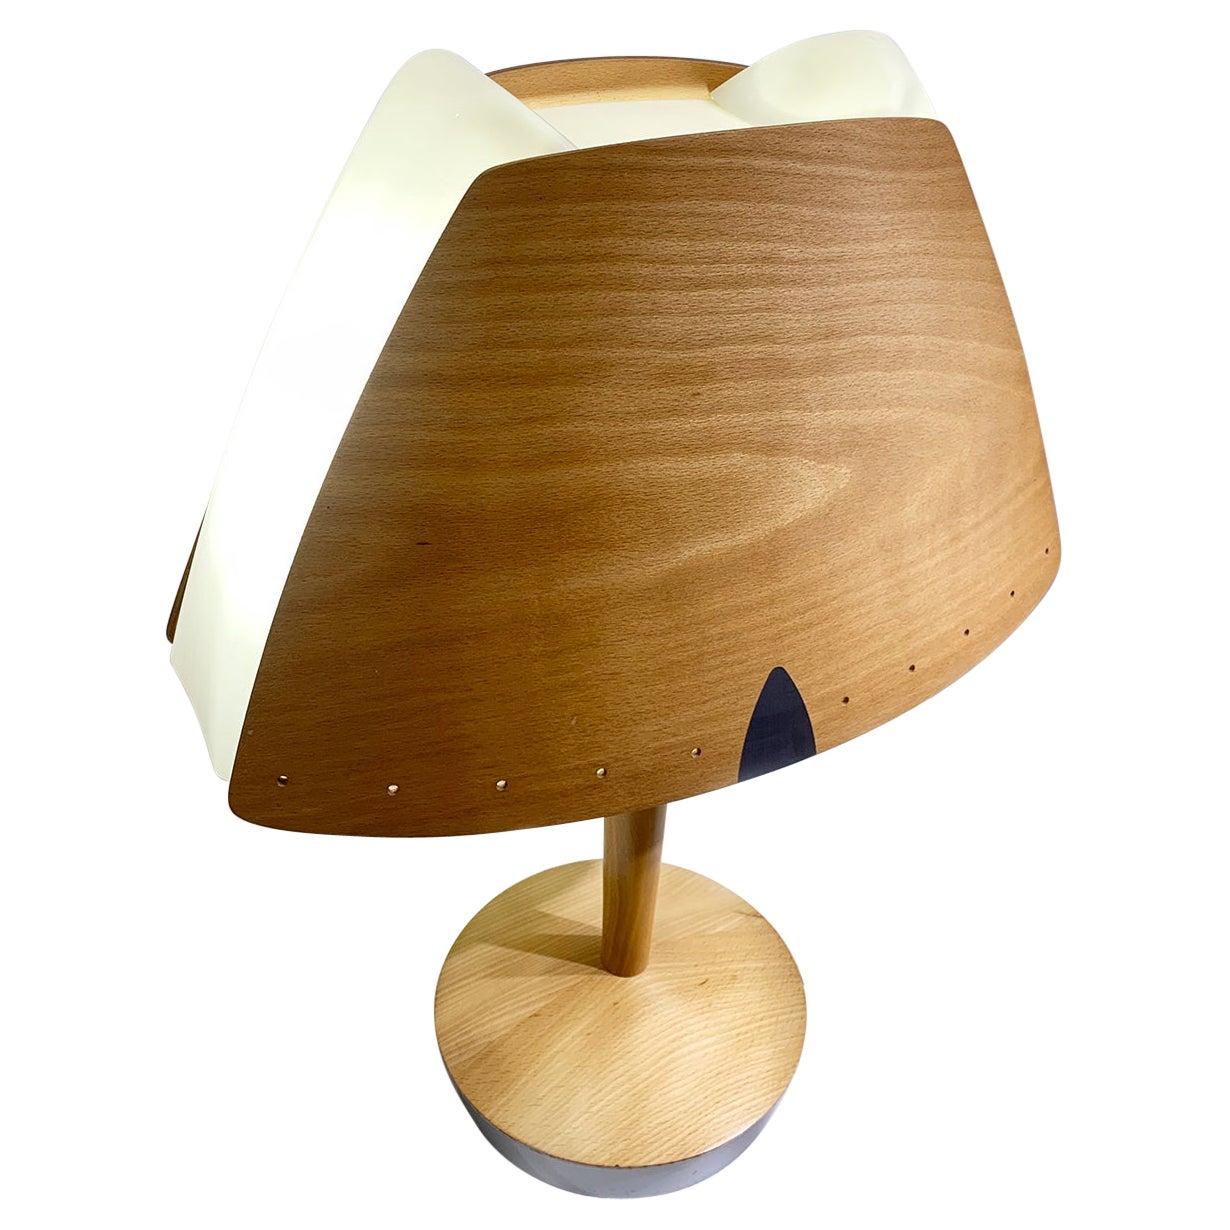 Midcentury French Design Wooden Table Lamp by Lucid, 1970s